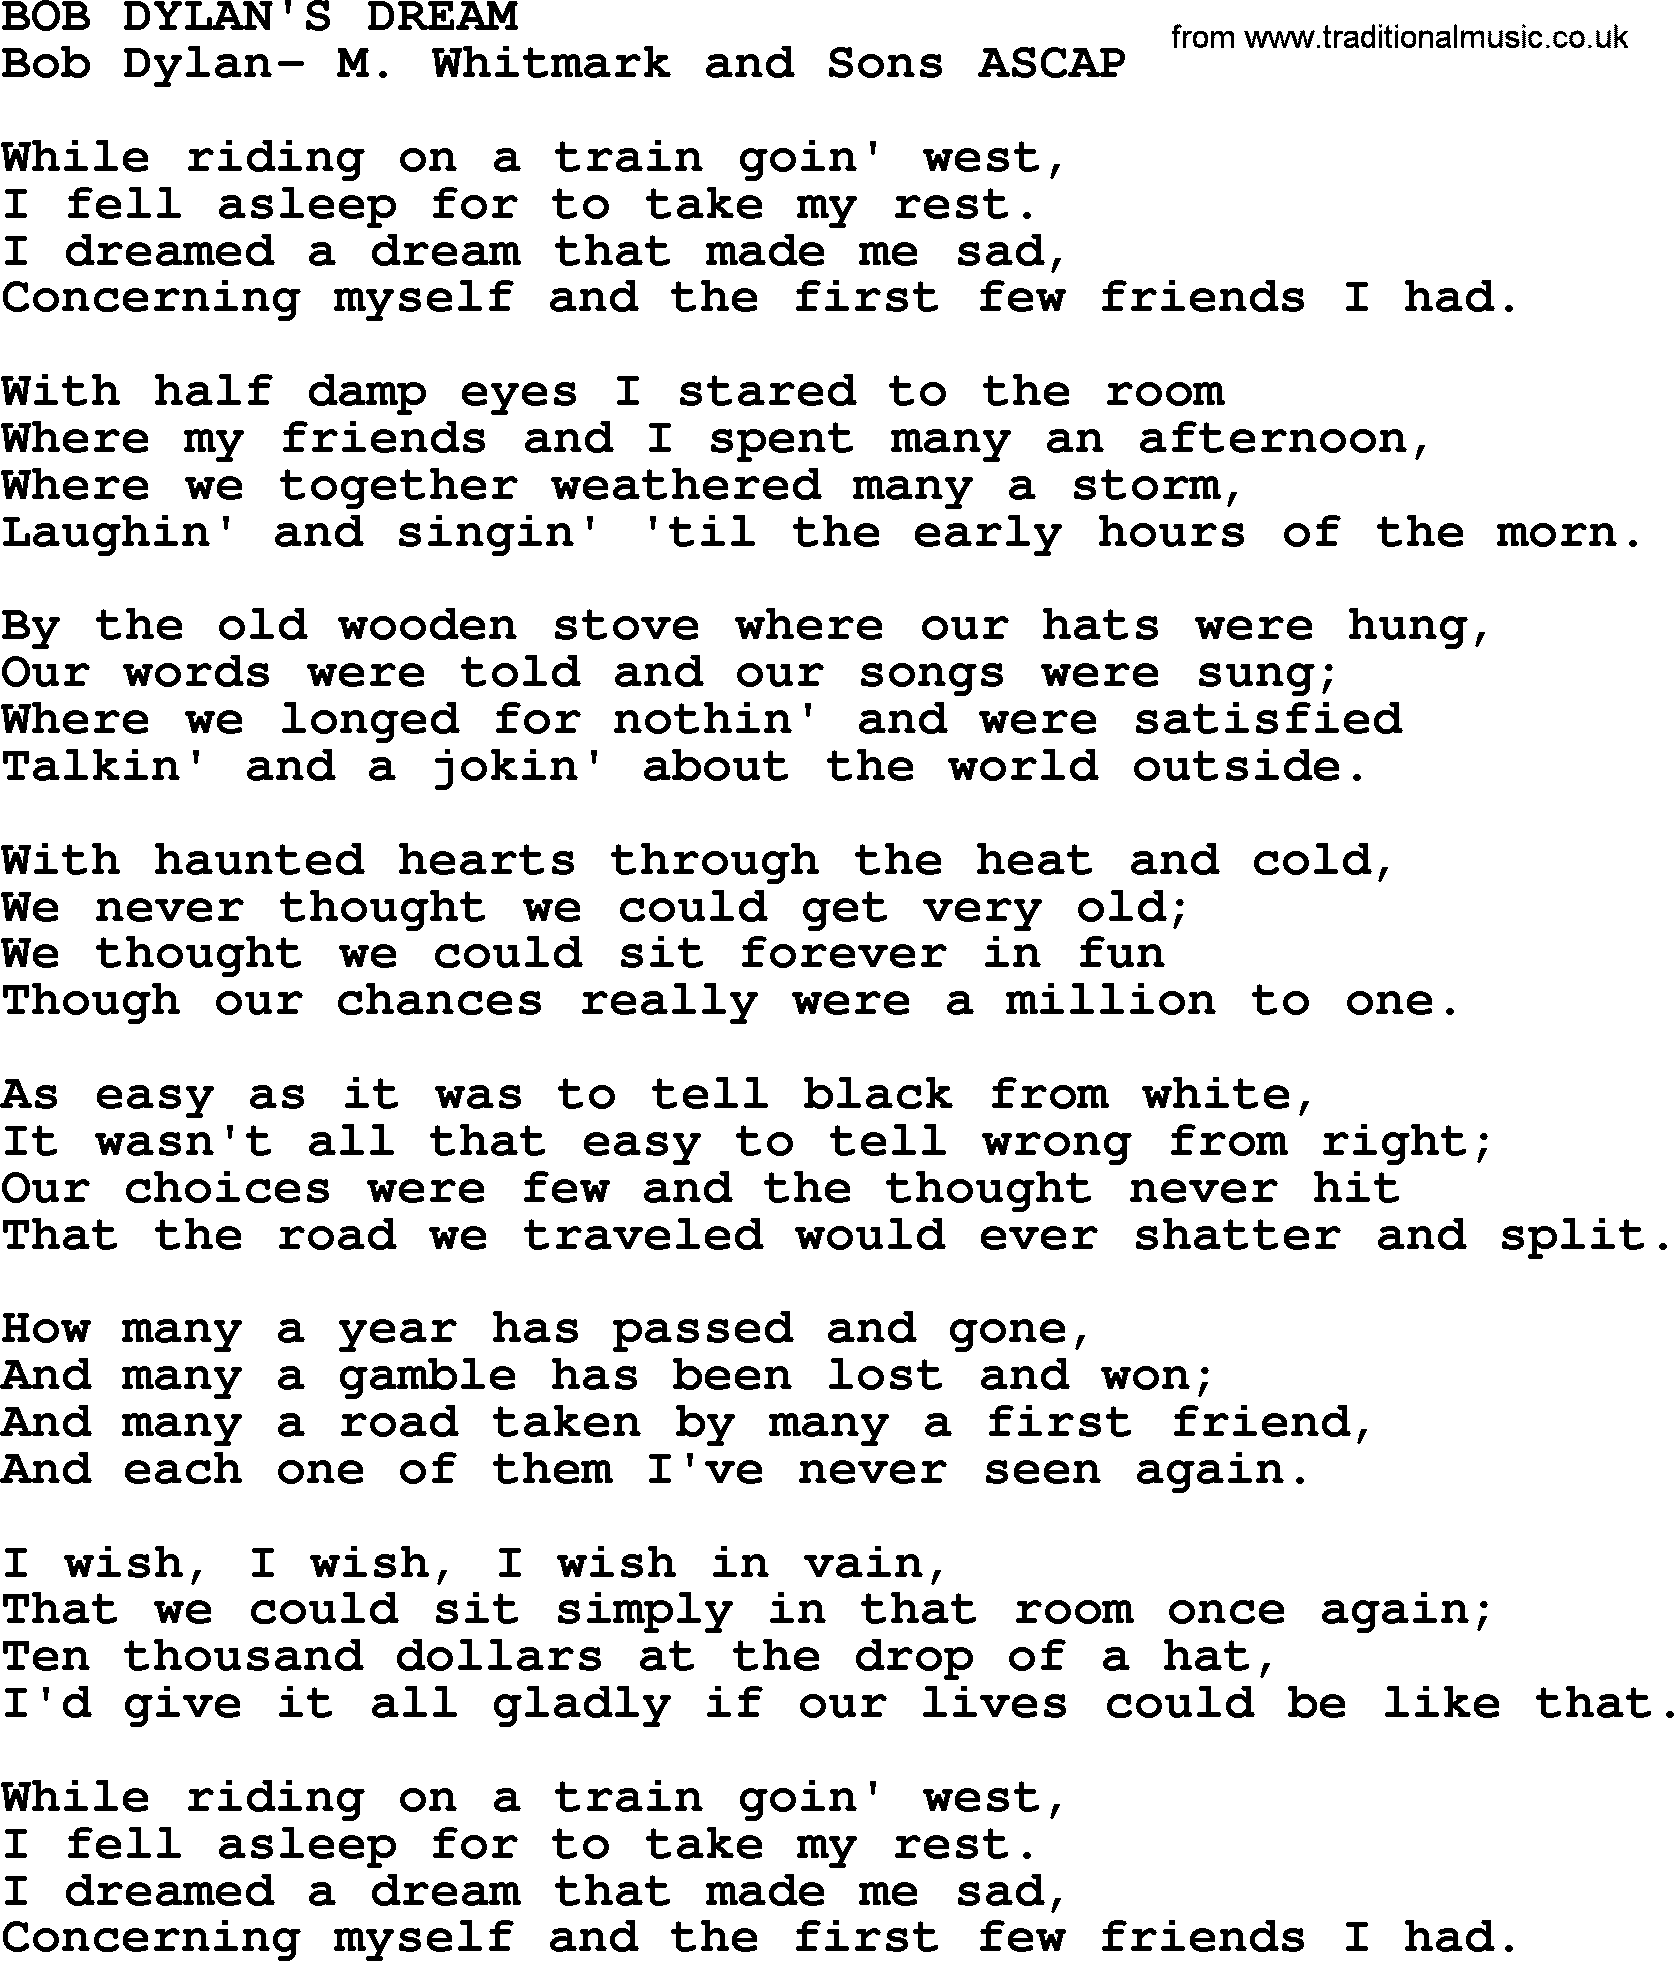 Peter, Paul and Mary song Bob Dylans Dream lyrics